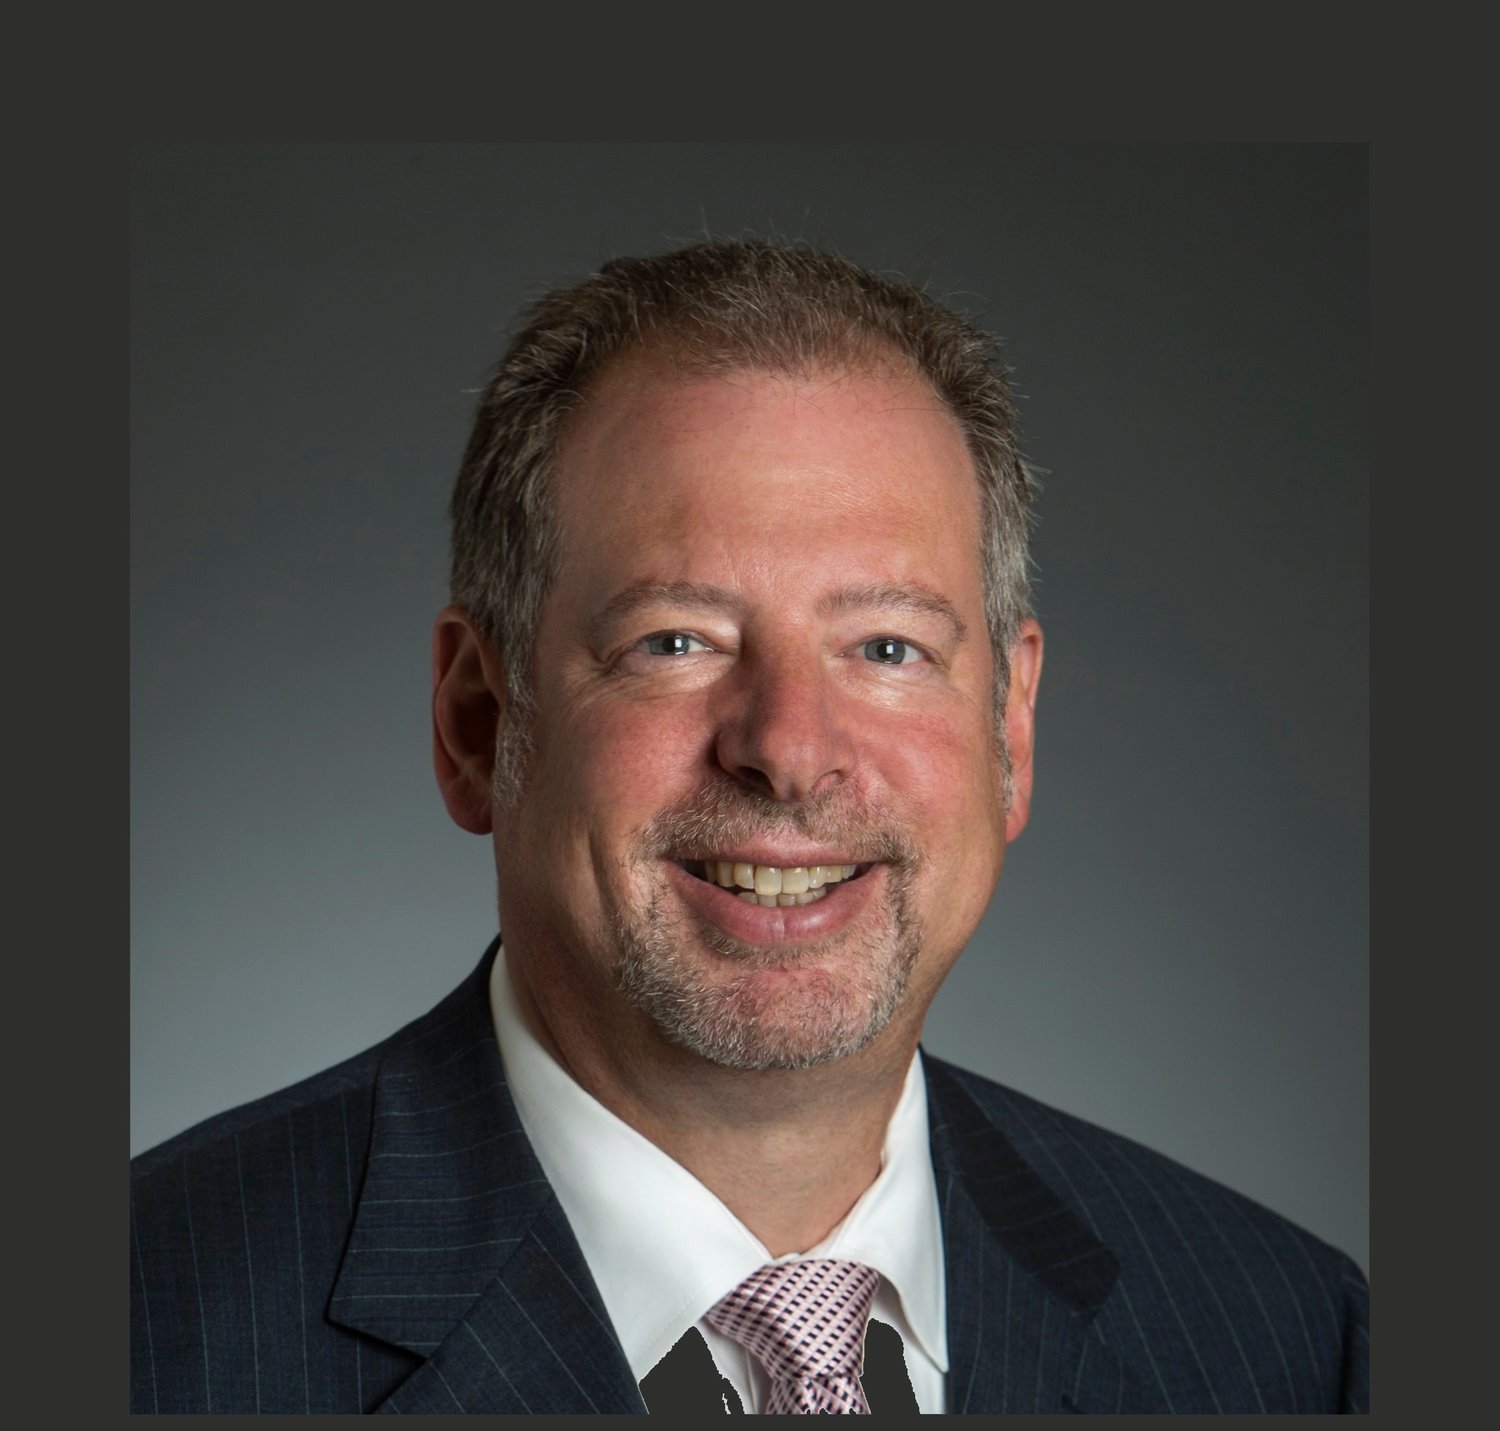 Joe Freudenberger is CEO at OakBend Medical Center. In a recent interview with the Katy Times, he expressed confidence in the upcoming COVID-19 vaccines and discussed advances in treatment of the disease over the last year.